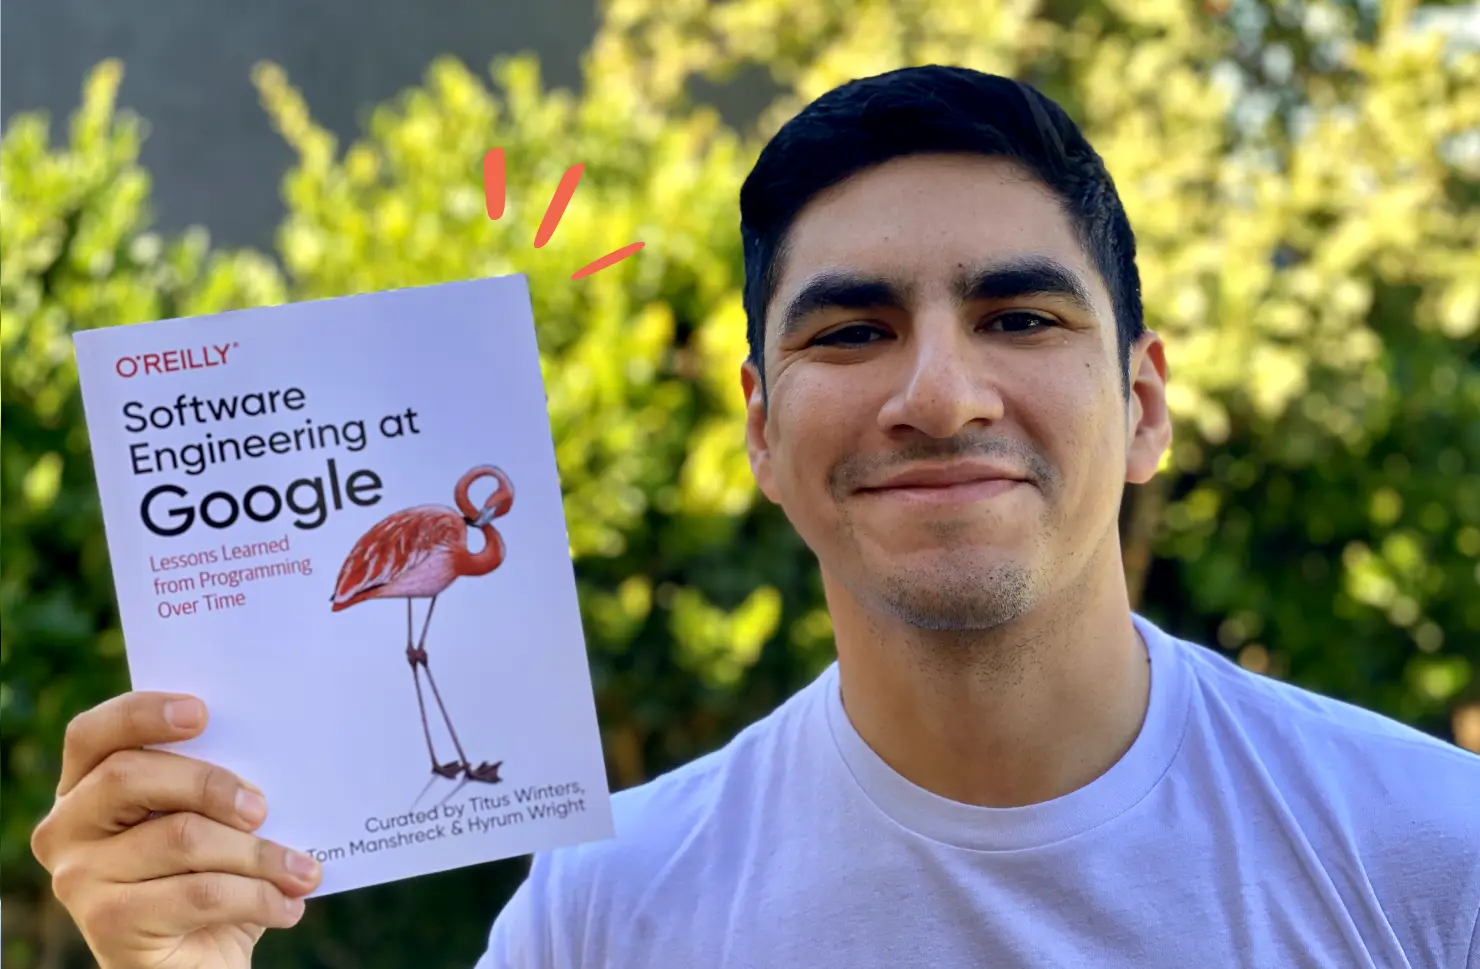 Photo of Maxi holding the book Software Engineering at Google